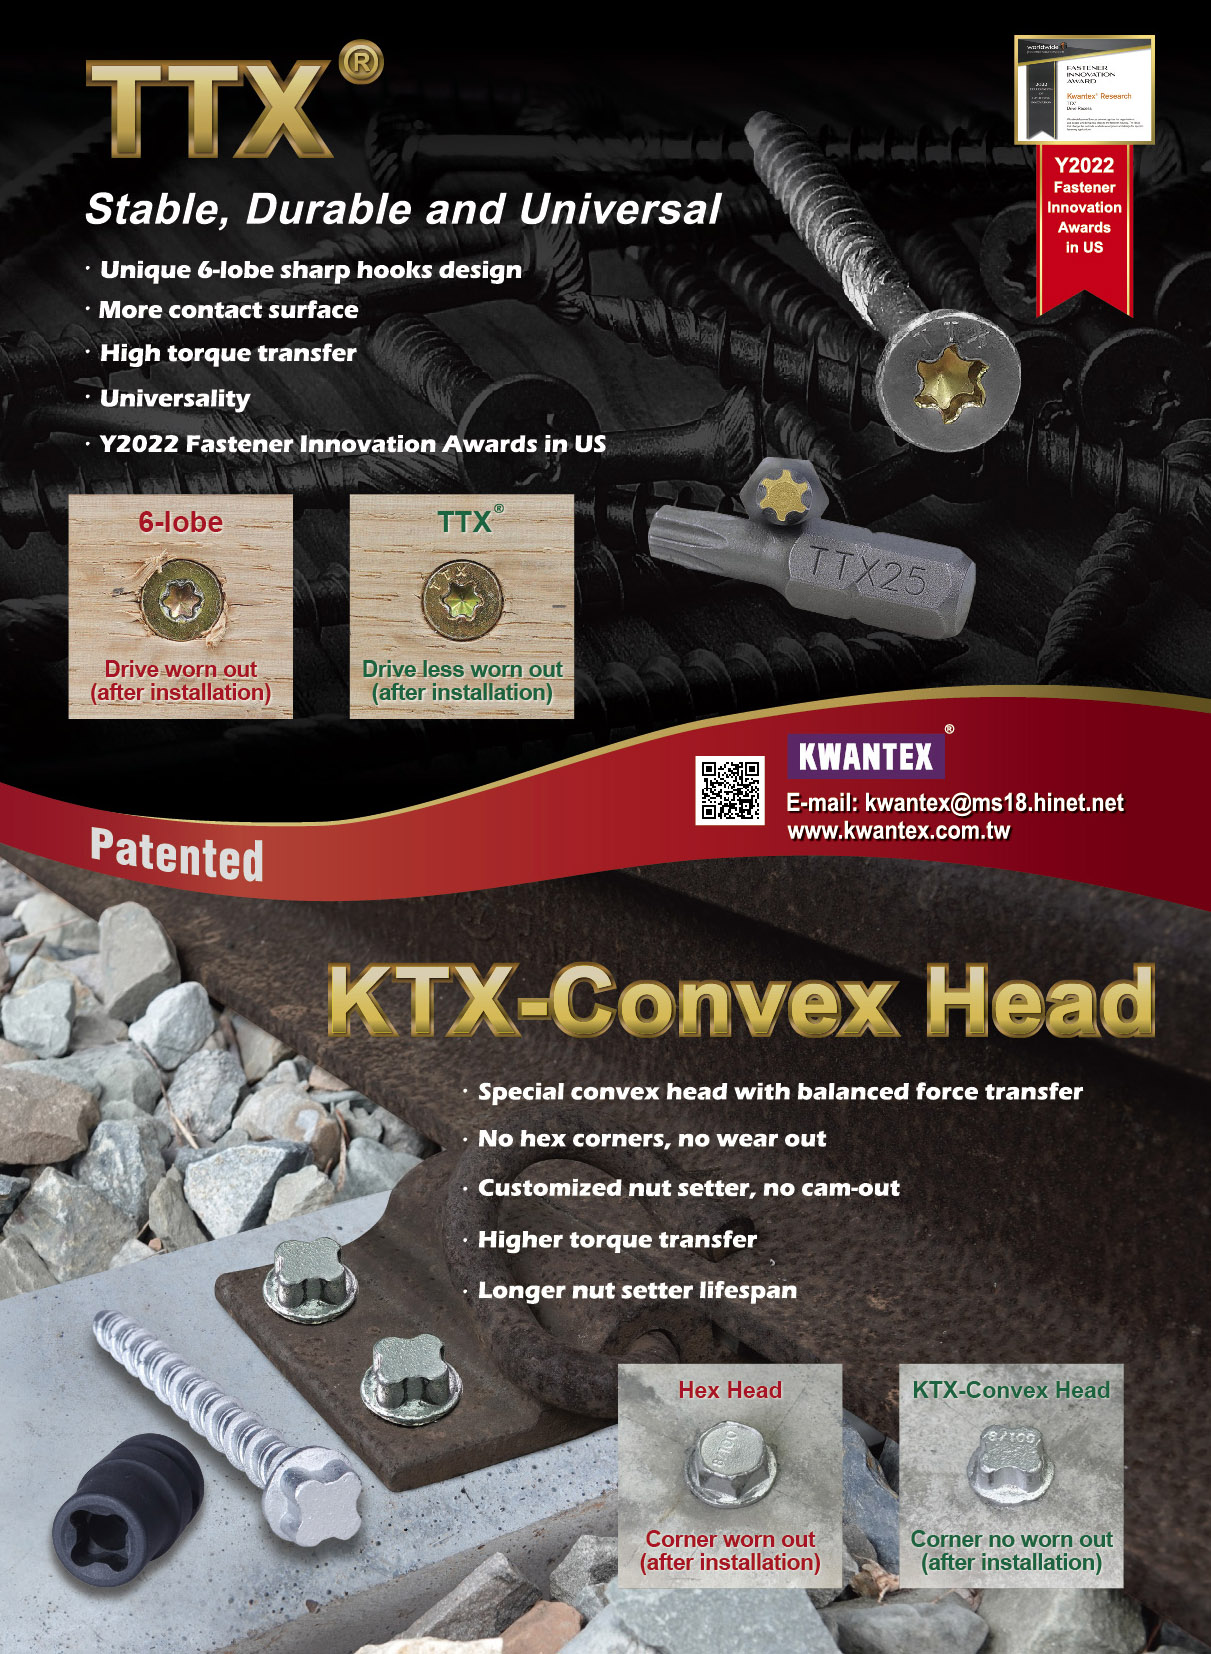 KWANTEX RESEARCH INC.  , TTX Stable, Durable and Universal, KTX-Convex Head